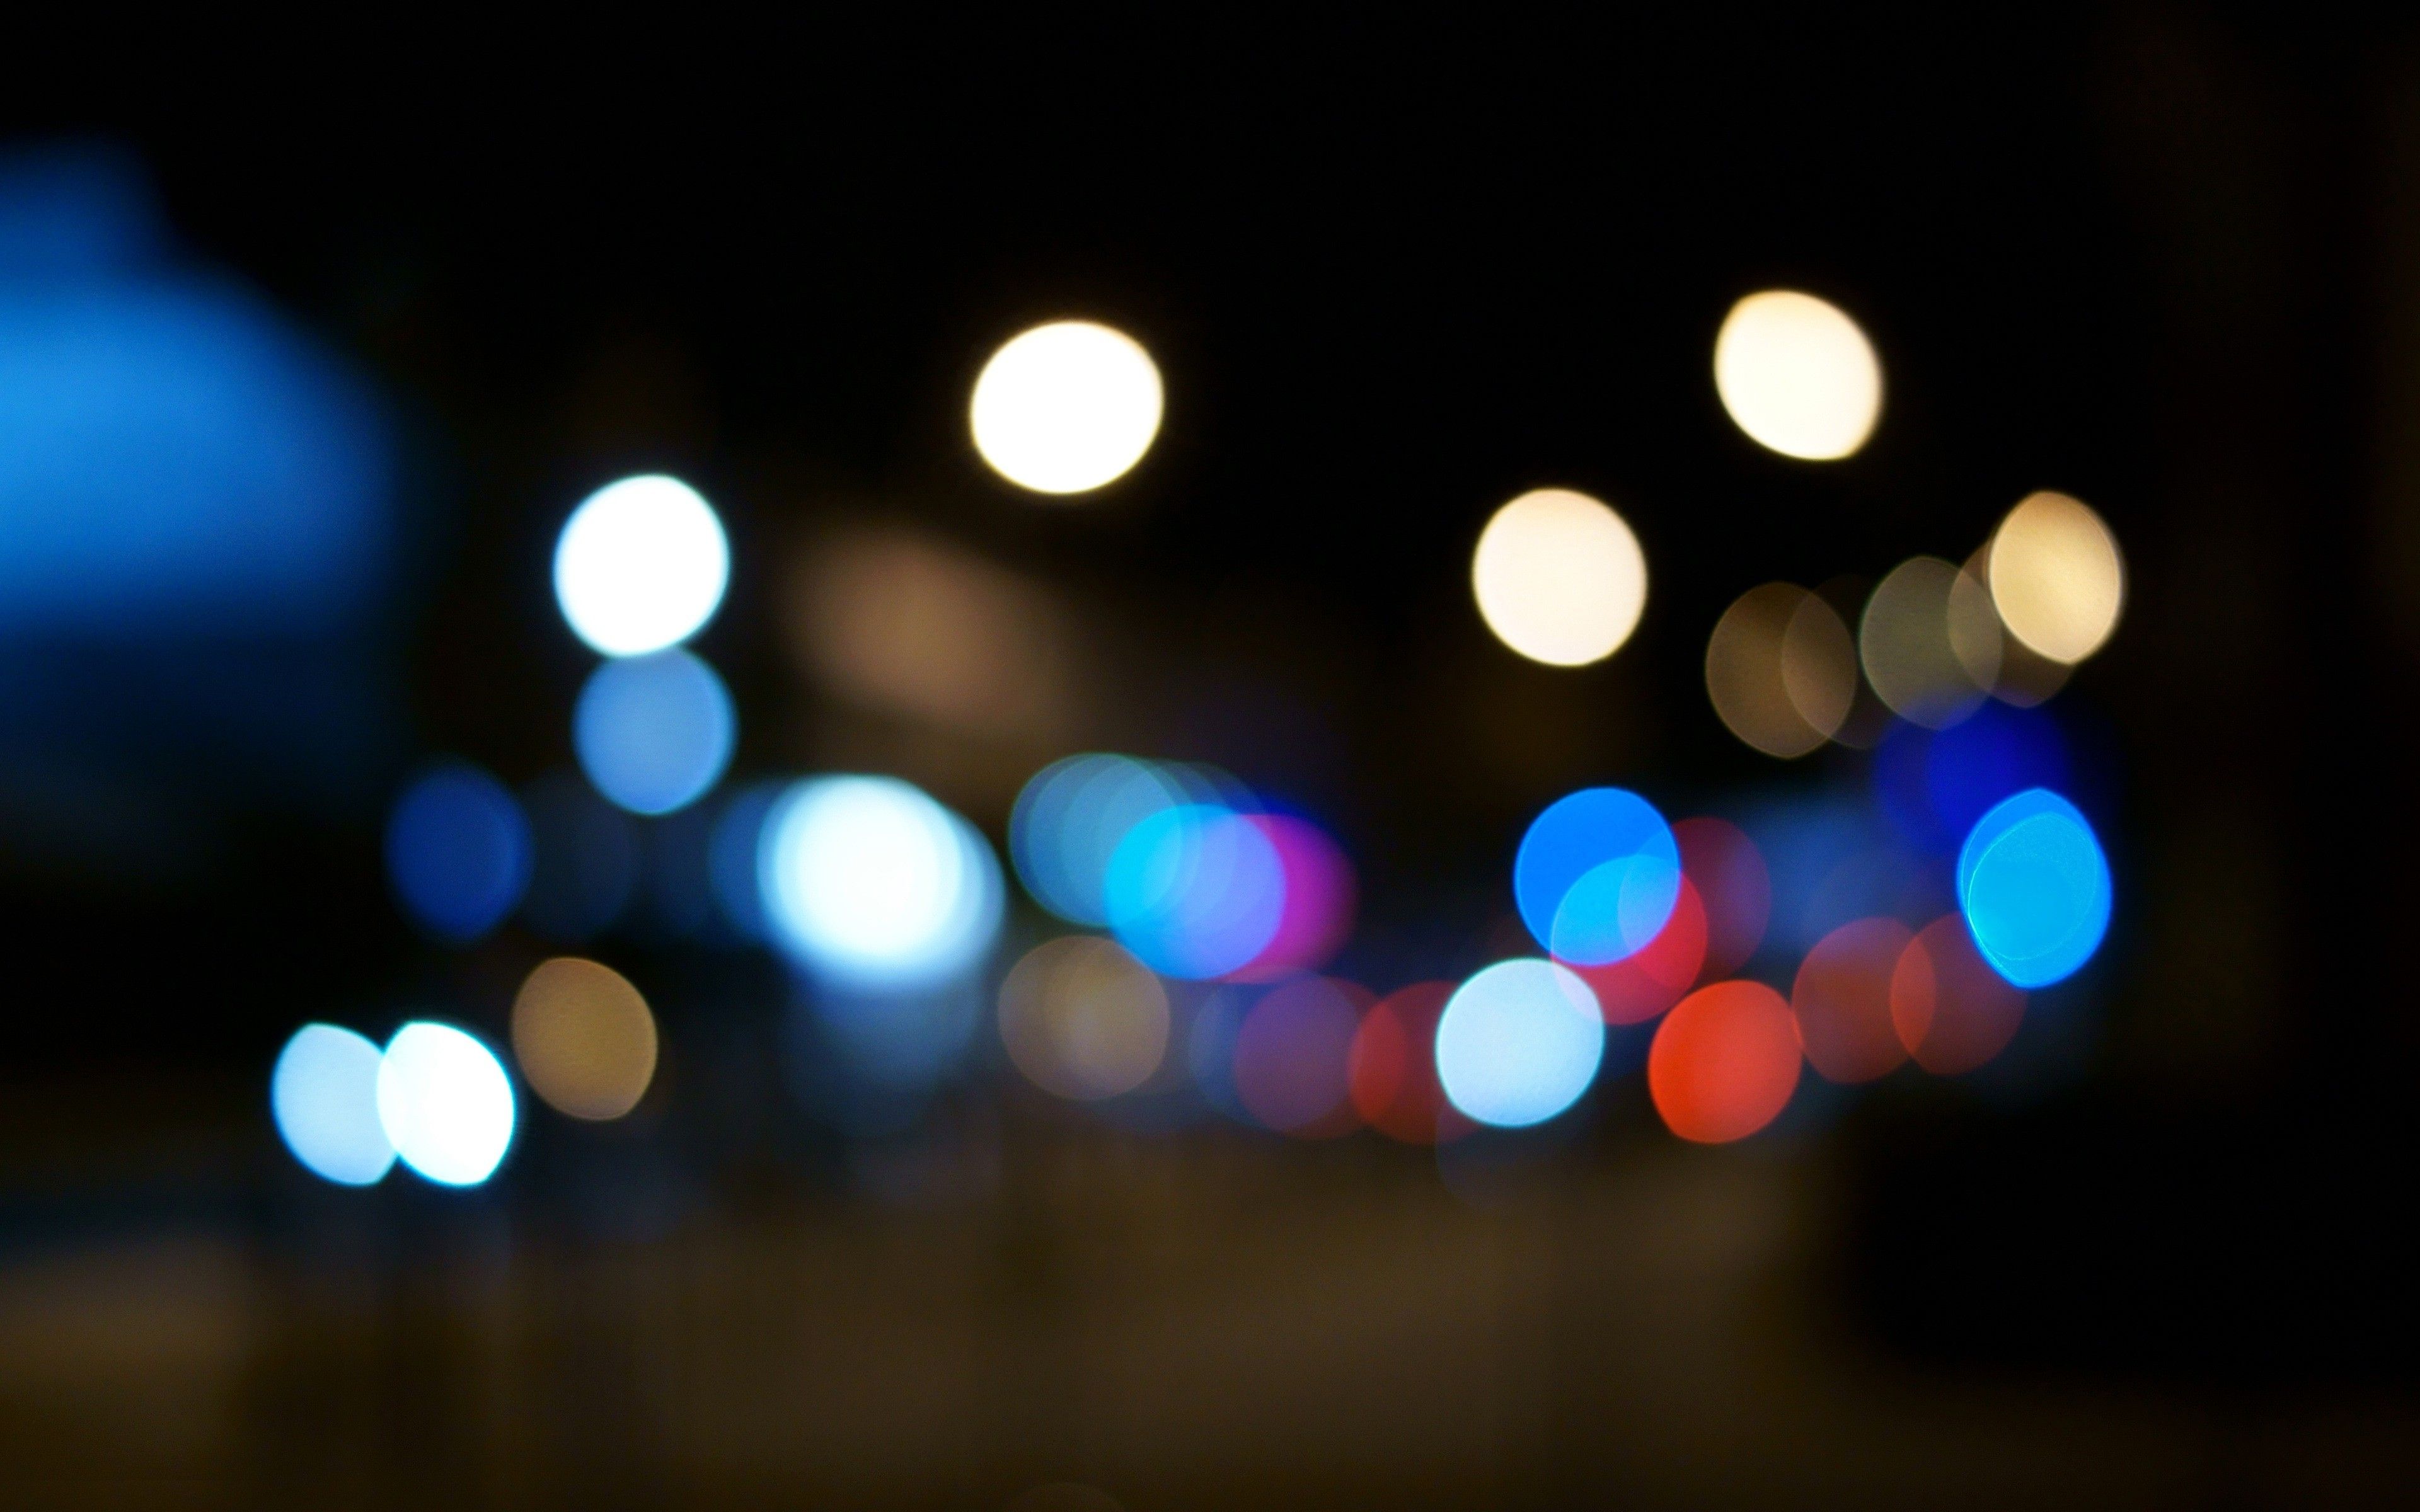 City light bulbs out of focus Wallpapers HD